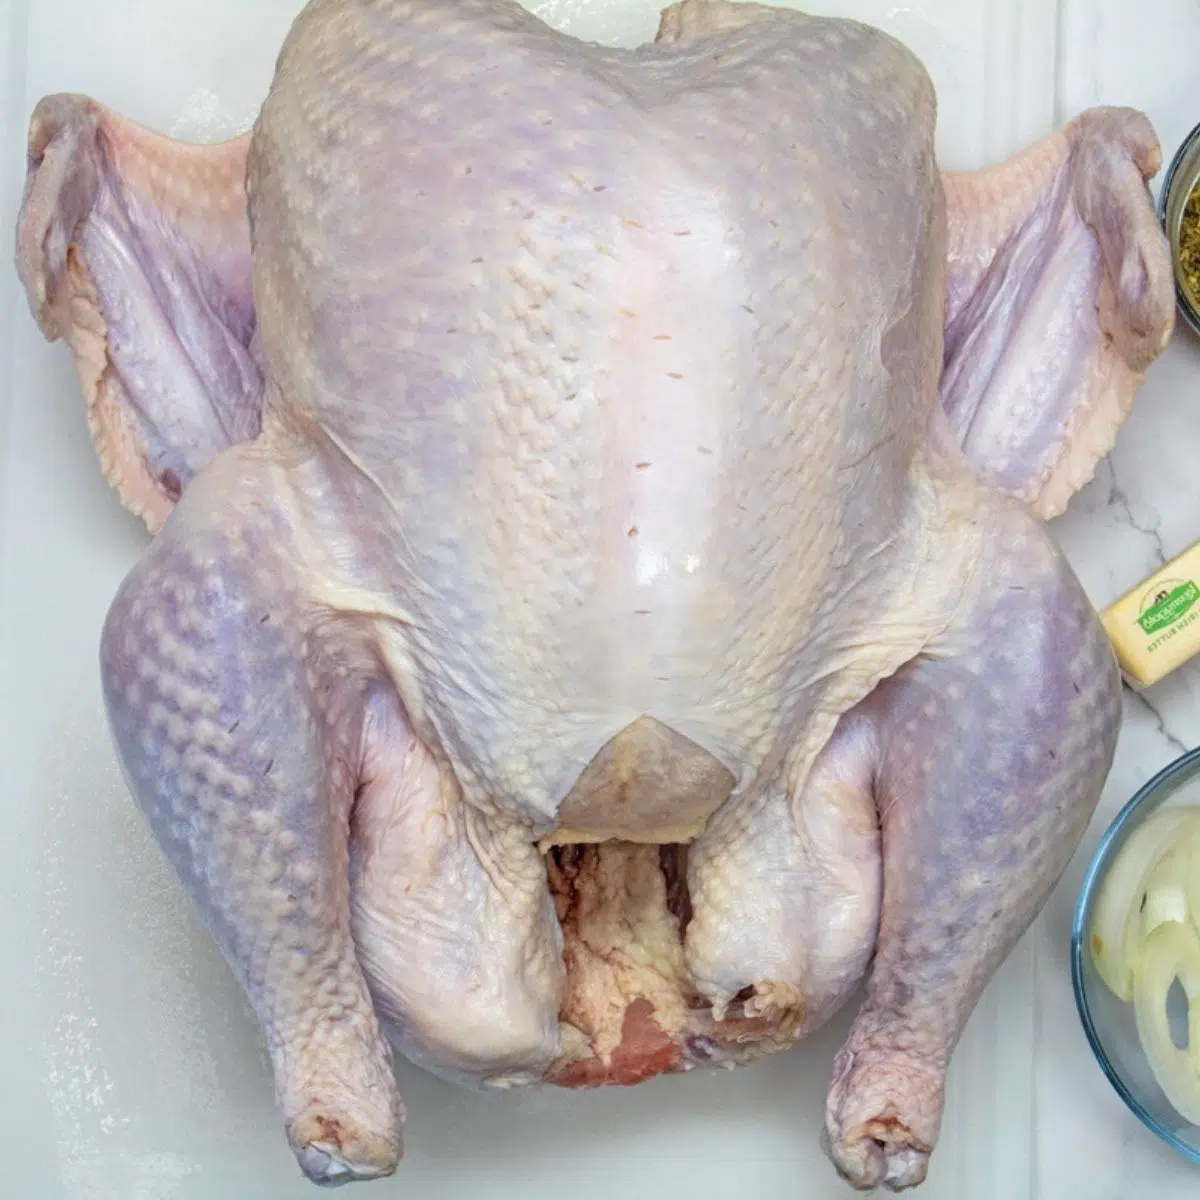 How to safely thaw turkey for holidays, Thanksgiving, and dinners year round.